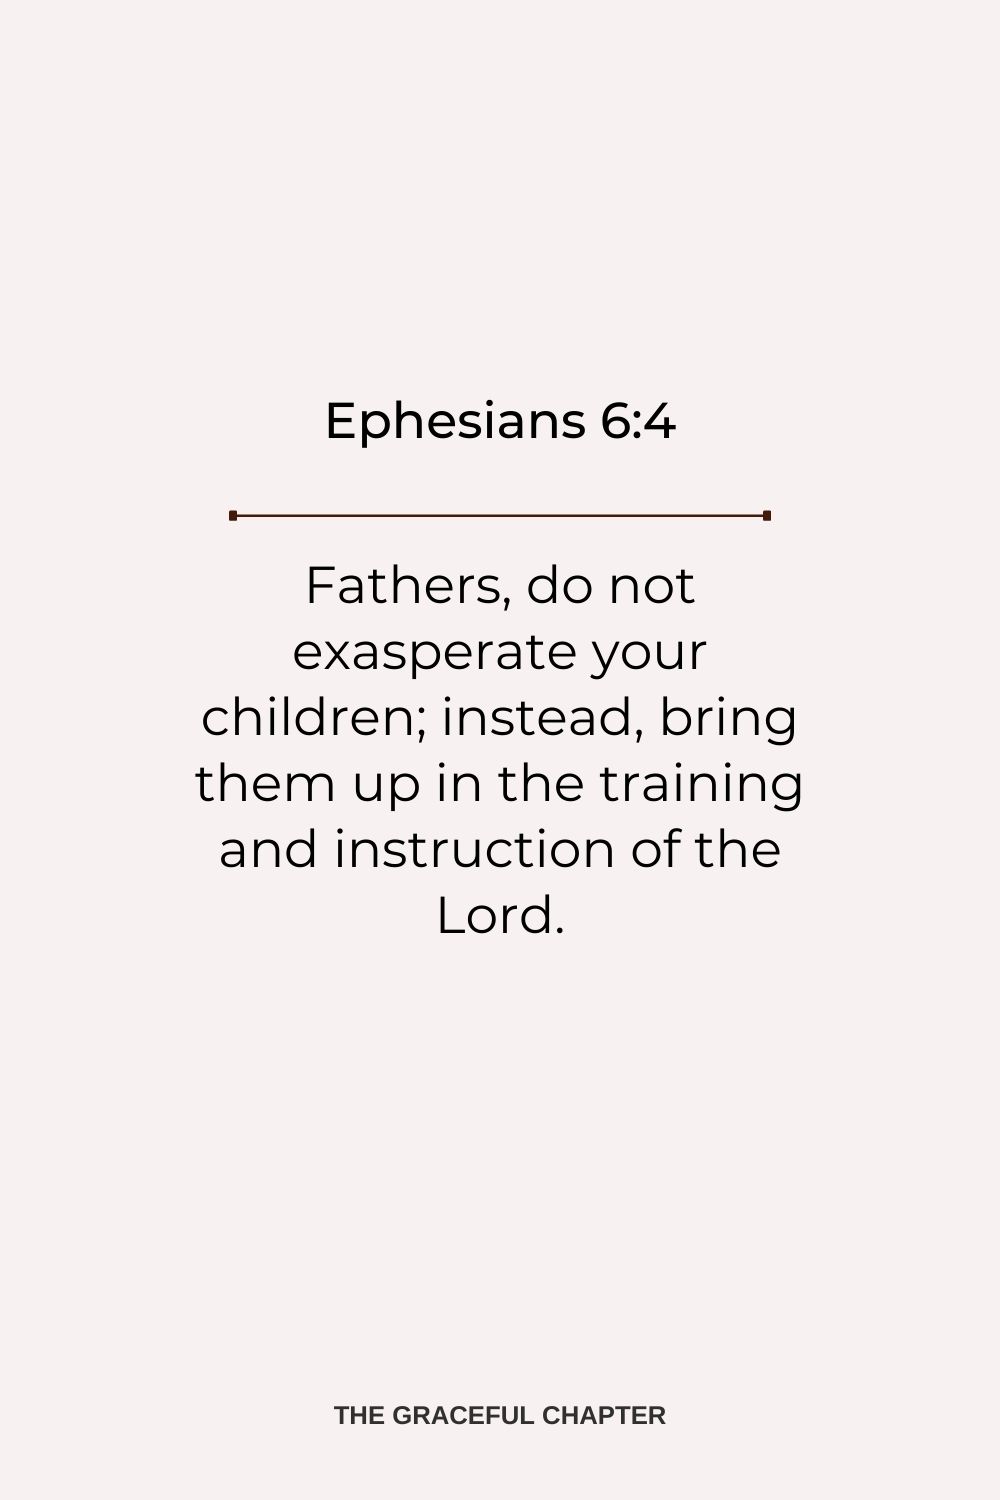 Fathers, do not exasperate your children; instead, bring them up in the training and instruction of the Lord. Ephesians 6:4